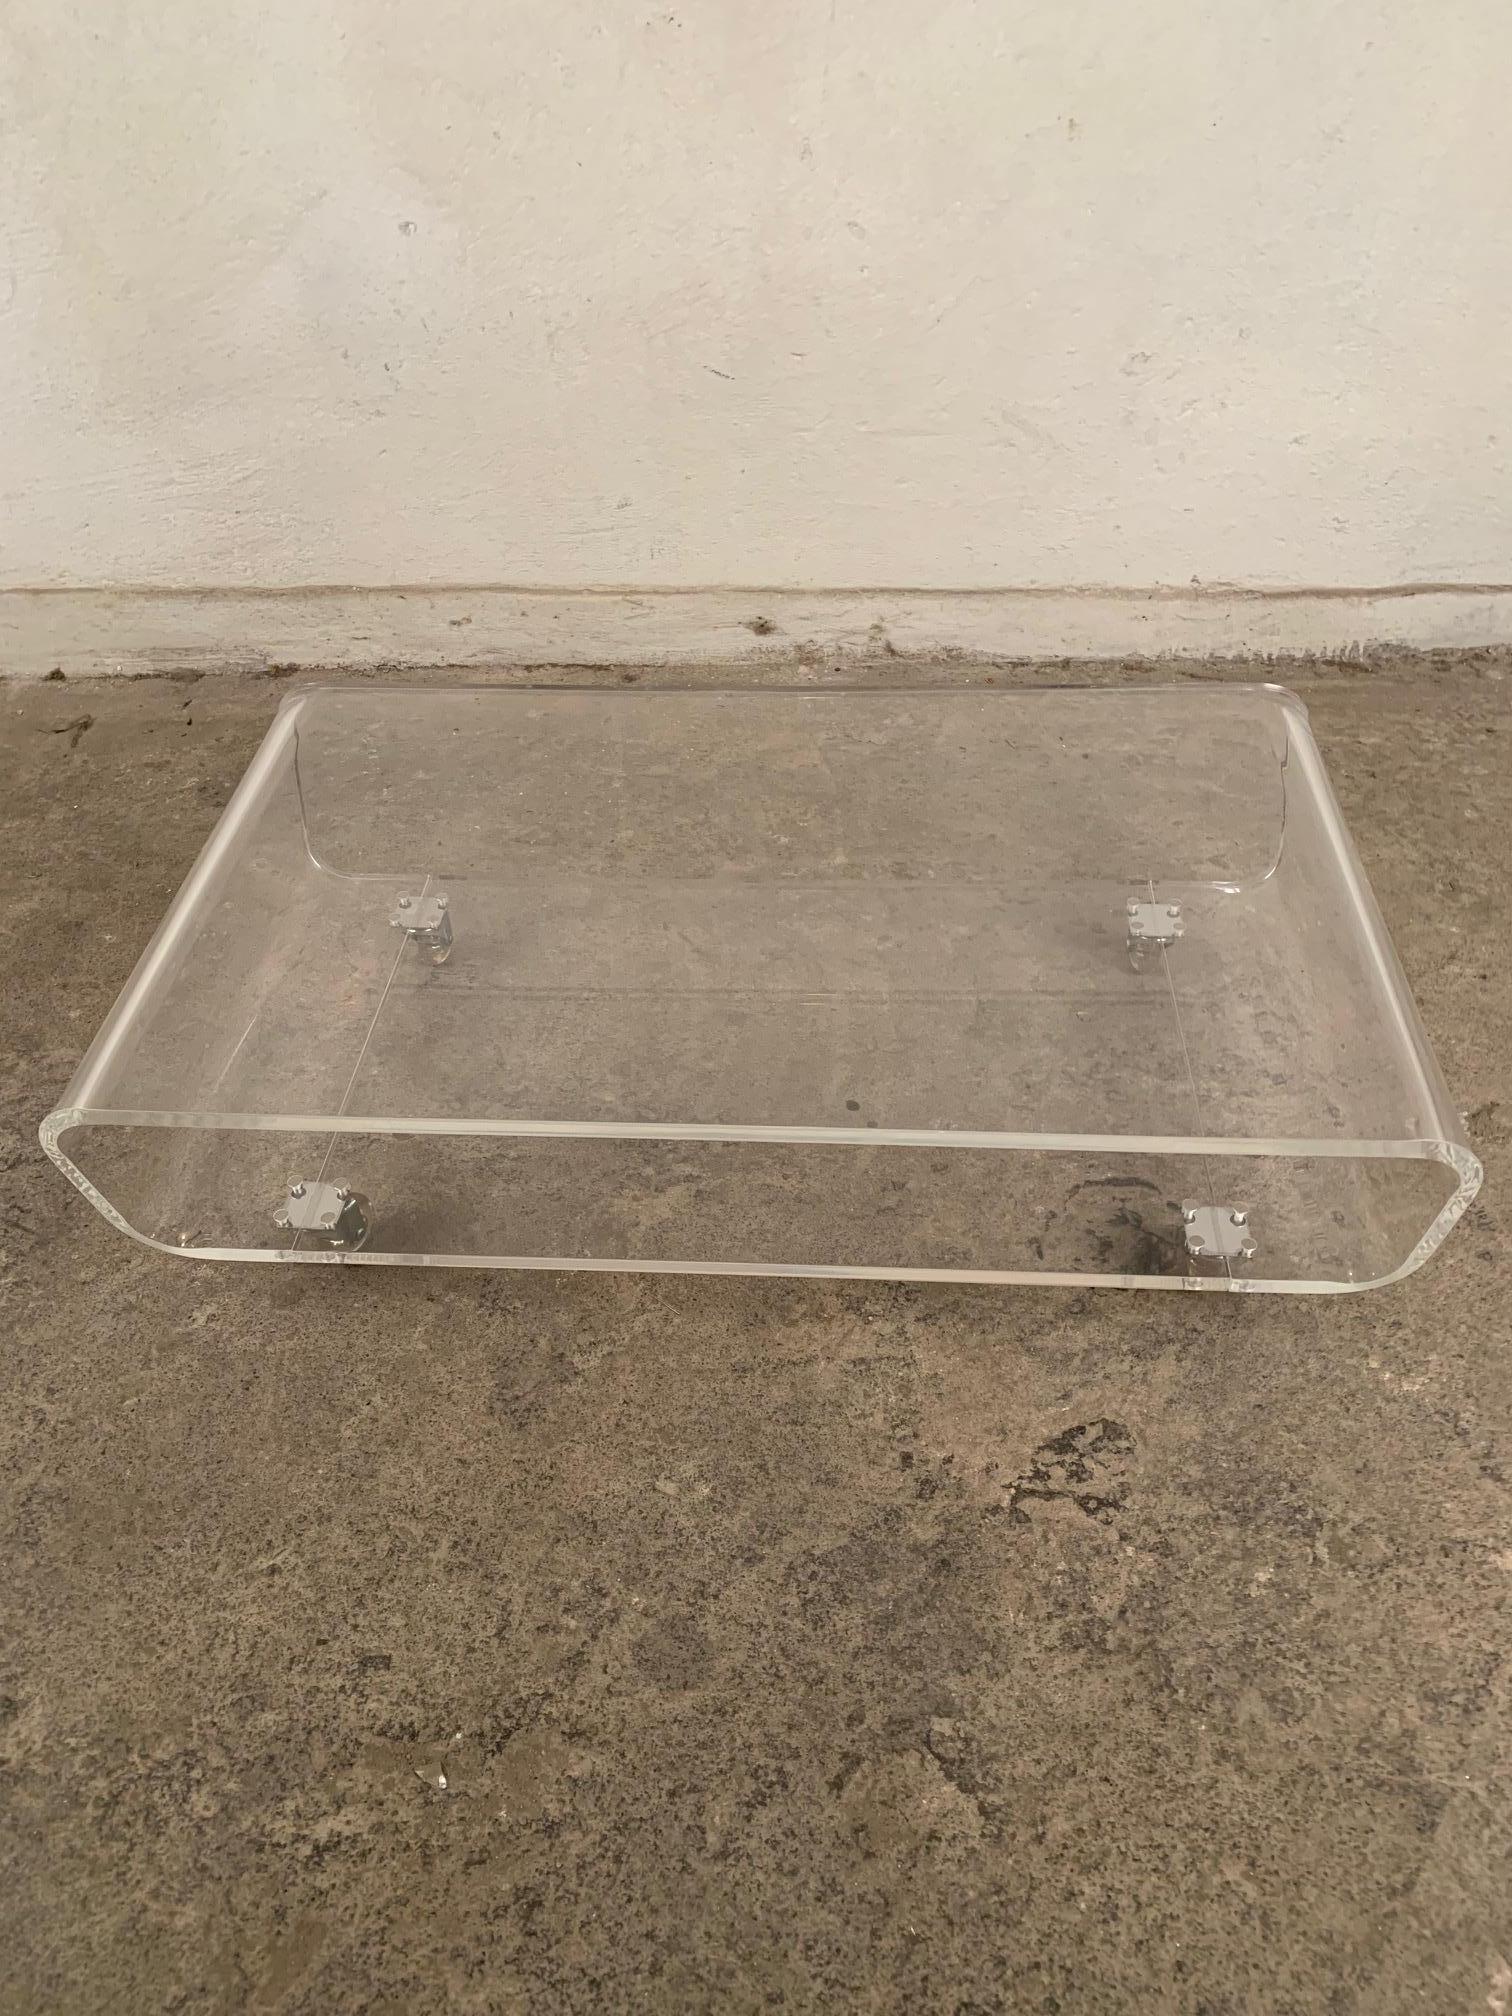 Lucite mobile coffee table, France, 1970s fully original. Attractive, timeless form.